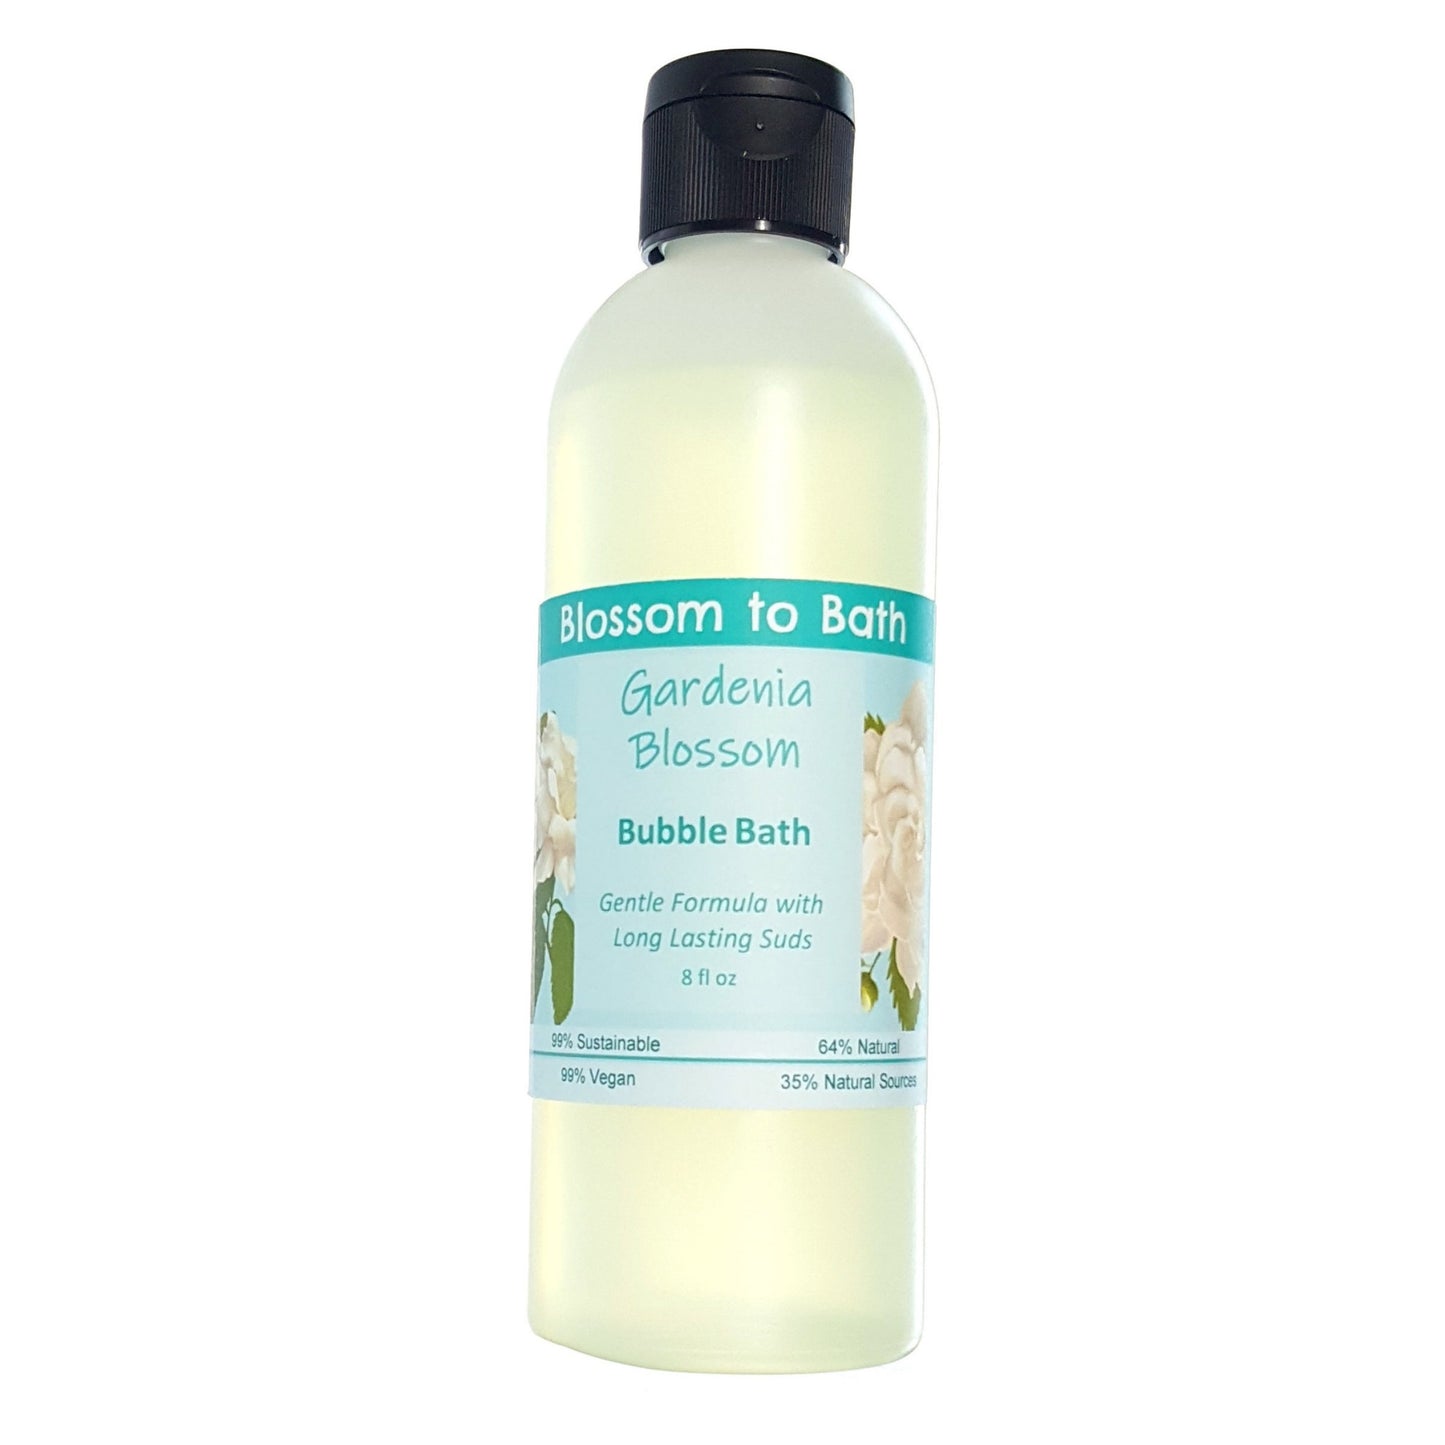 Buy Blossom to Bath Gardenia Blossom Bubble Bath from Flowersong Soap Studio.  Lively, long lasting  bubbles in a gentle plant based formula for maximum relaxation time  Sweet Gardenia in a puff of blooming summer flowers